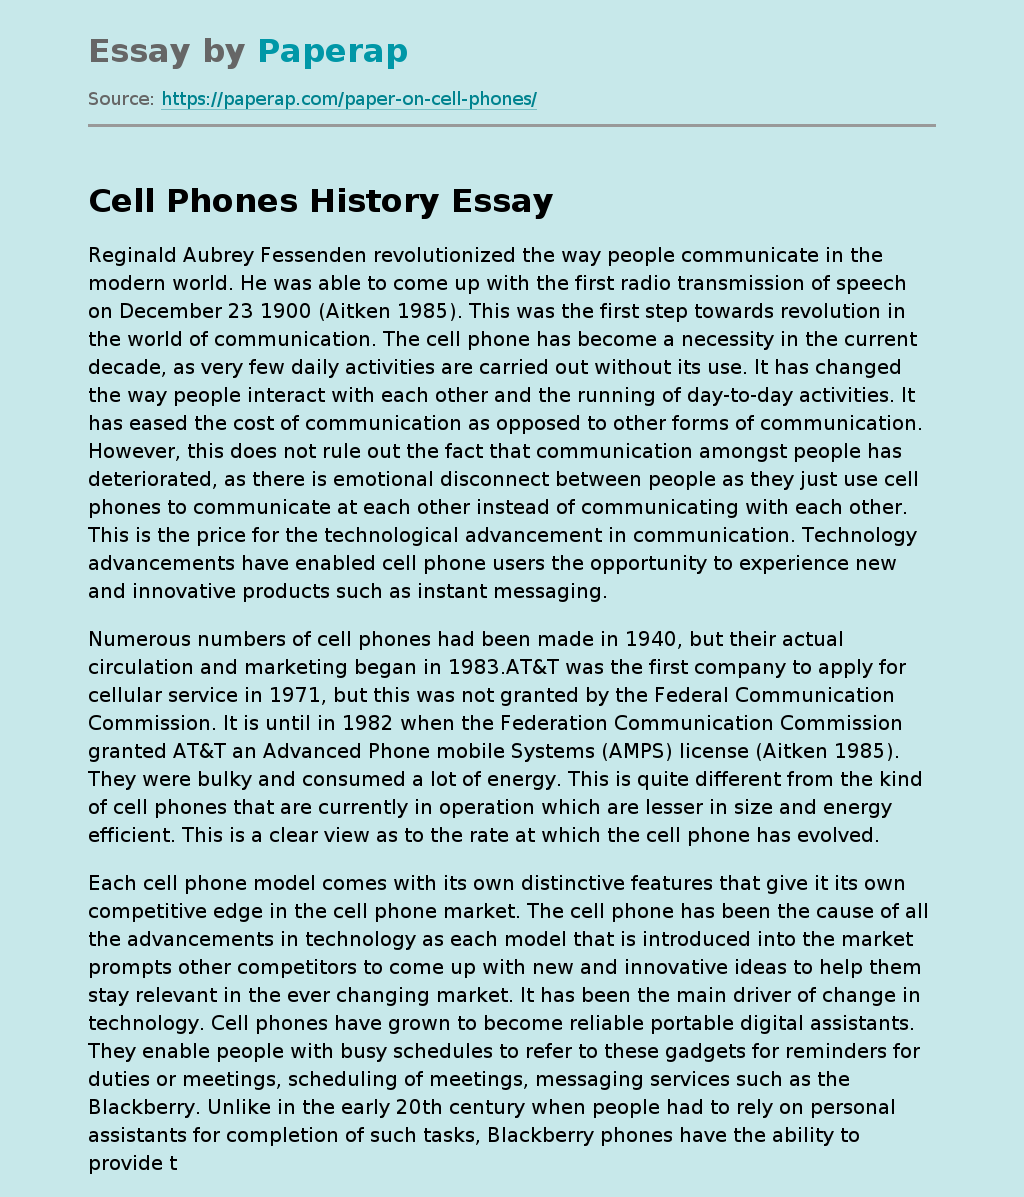 The Cell Phones History